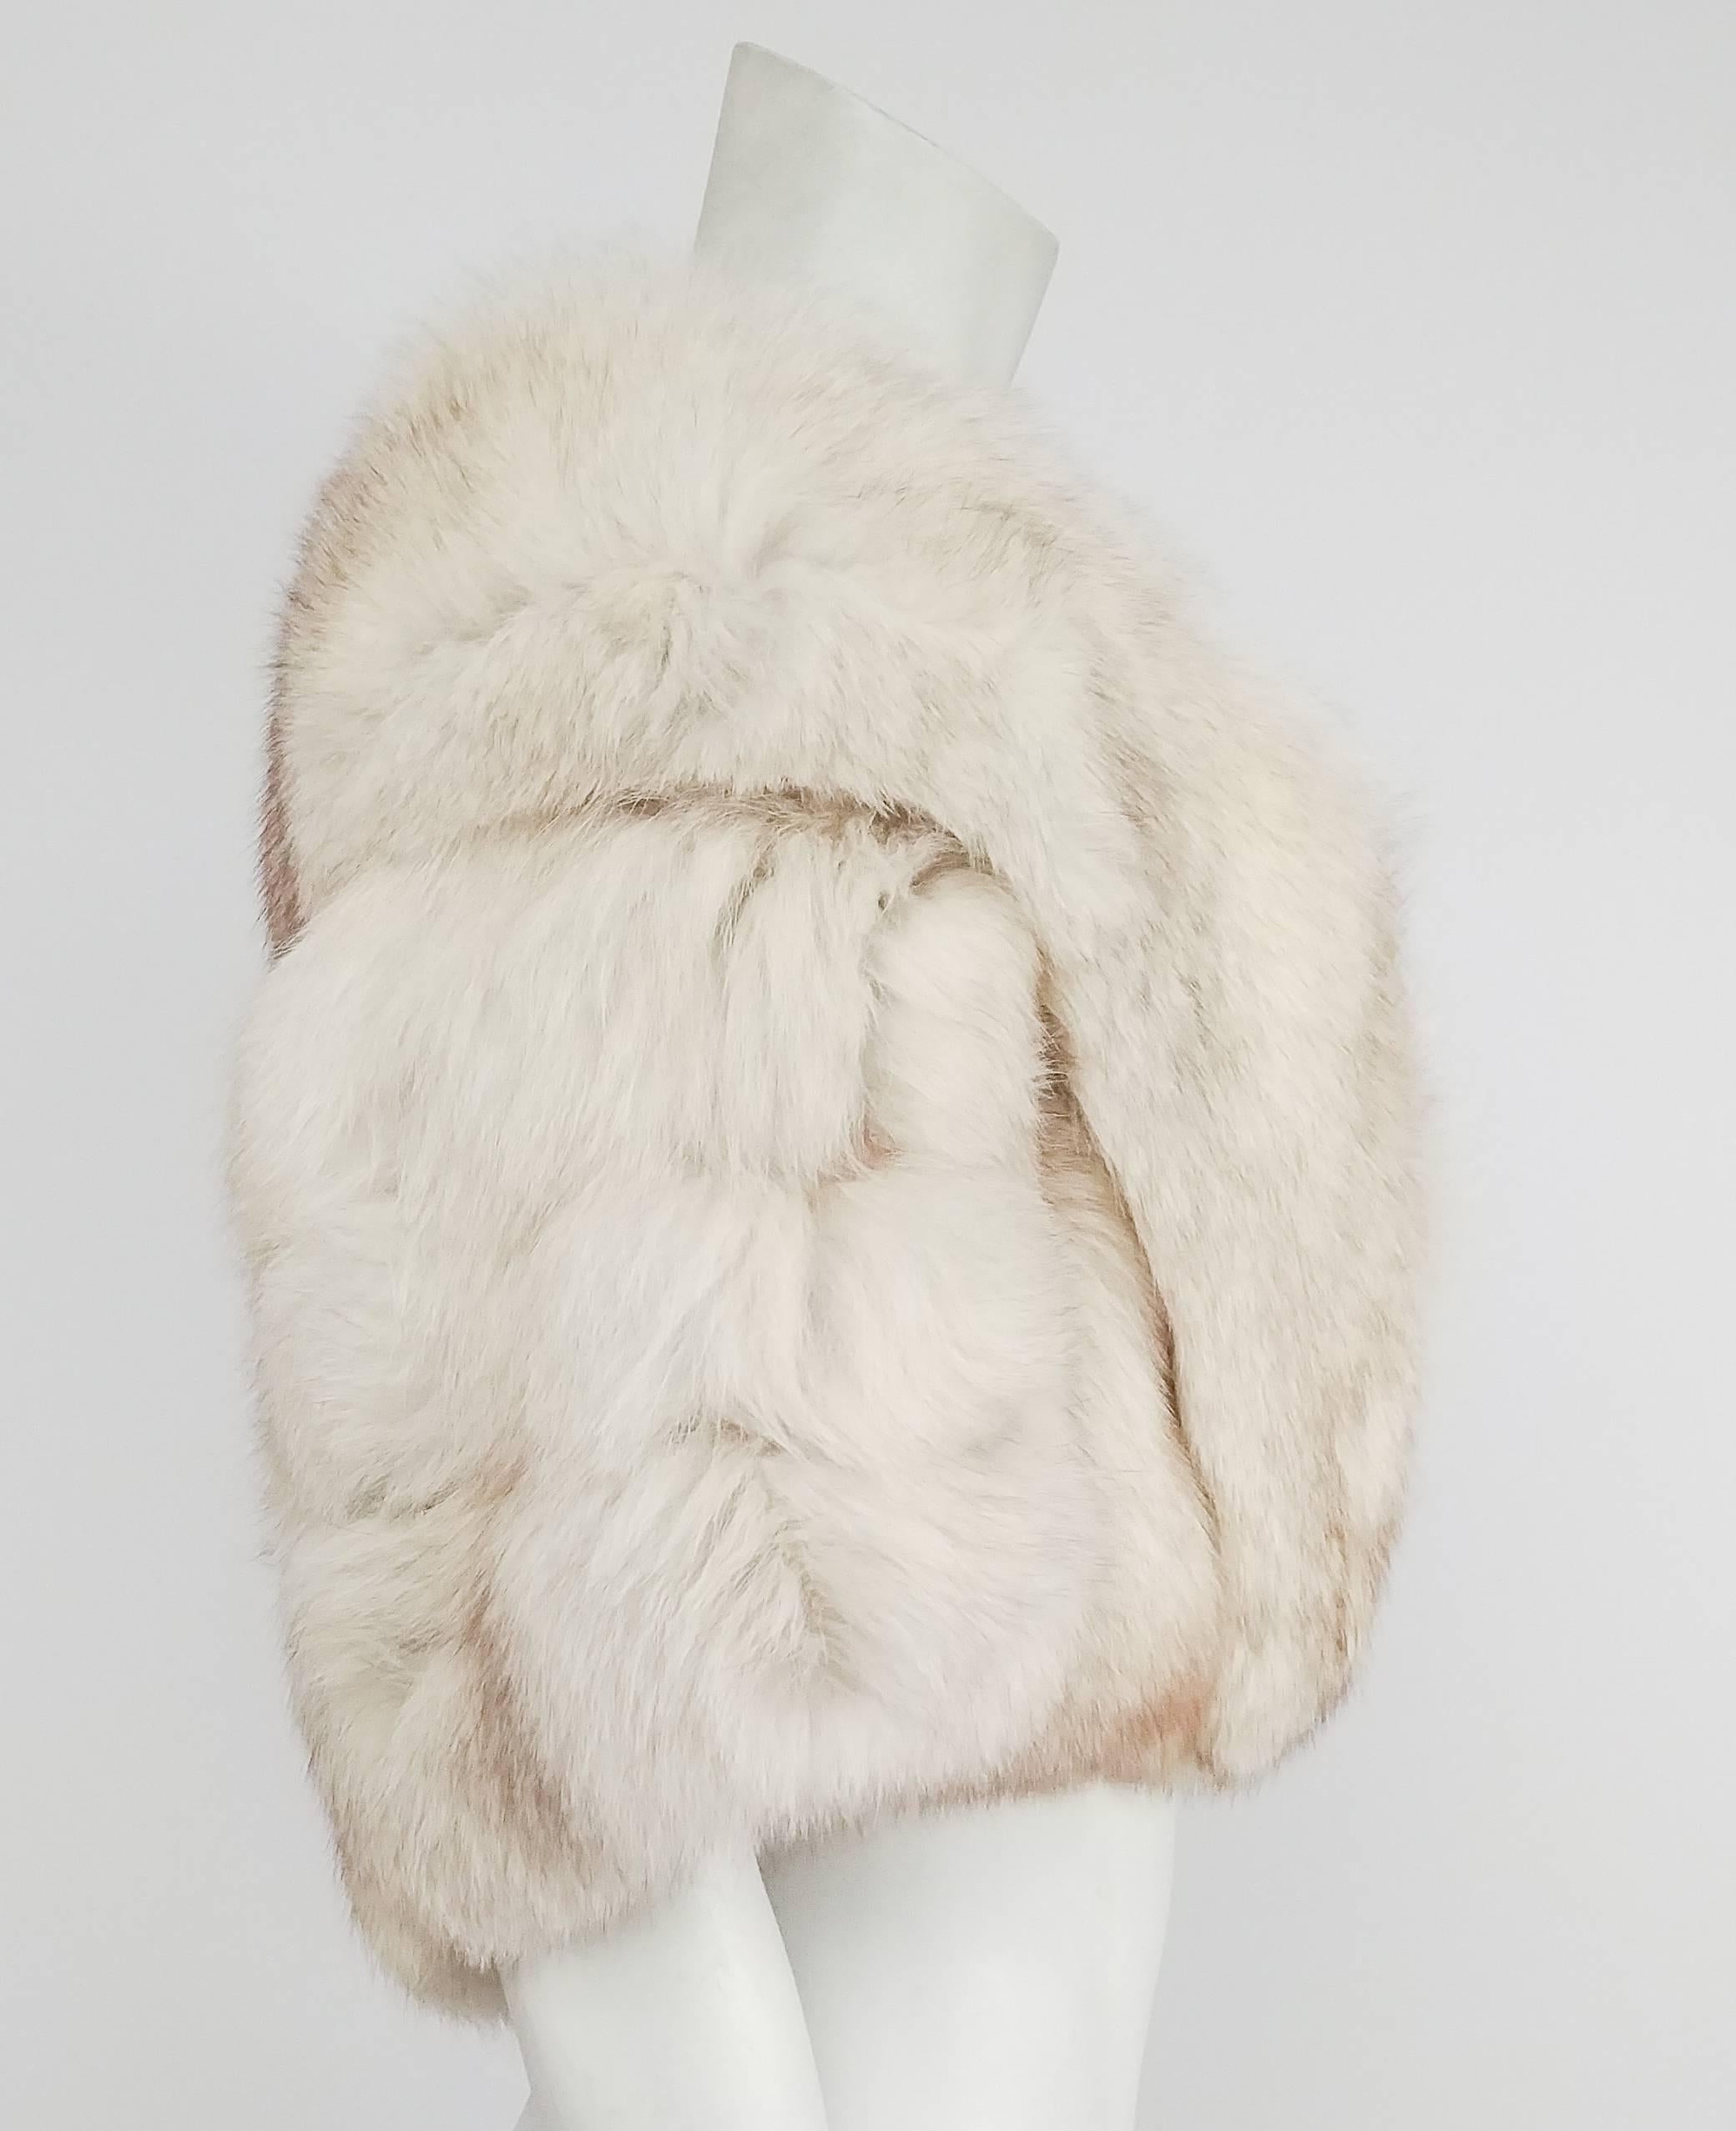 1950s Cream Fox Fur Stole. Interesting pieced back detail. Hook & eye closure. Structured to fit over shoulders. Embroidered on lining. 